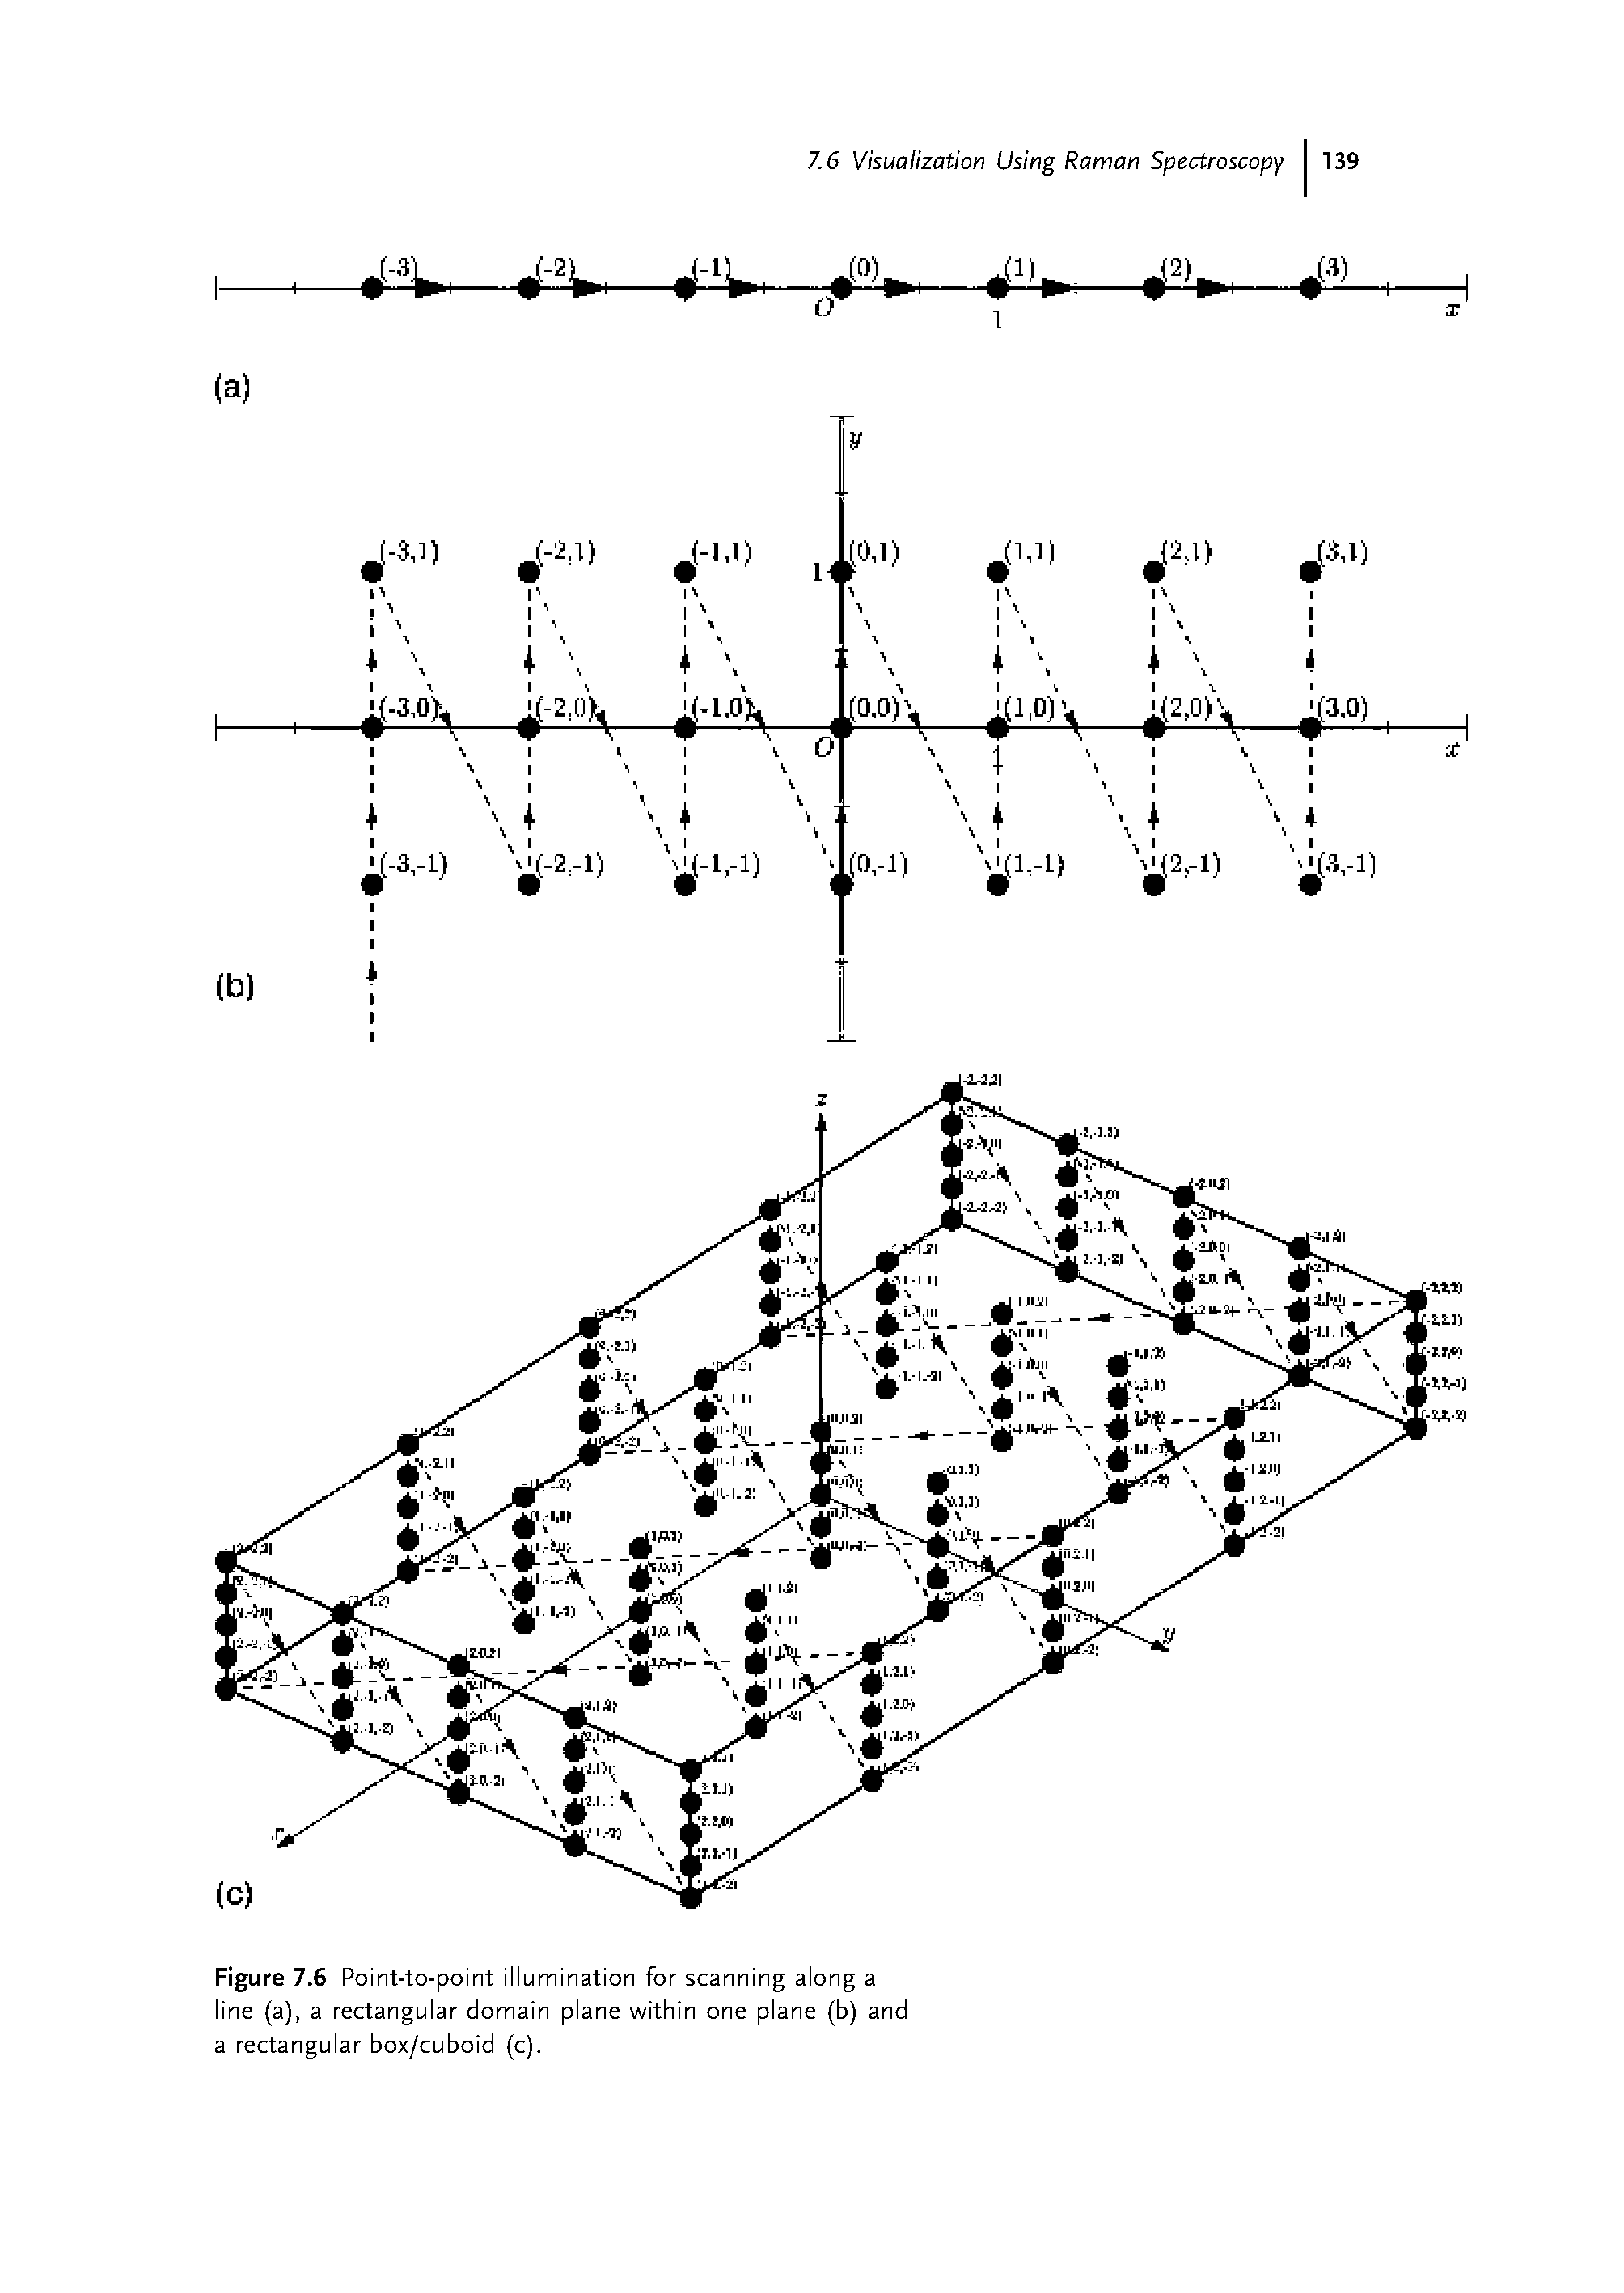 Figure 7.6 Point-to-point illumination for scanning along a line (a), a rectangular domain plane within one plane (b) and a rectangular box/cuboid (c).